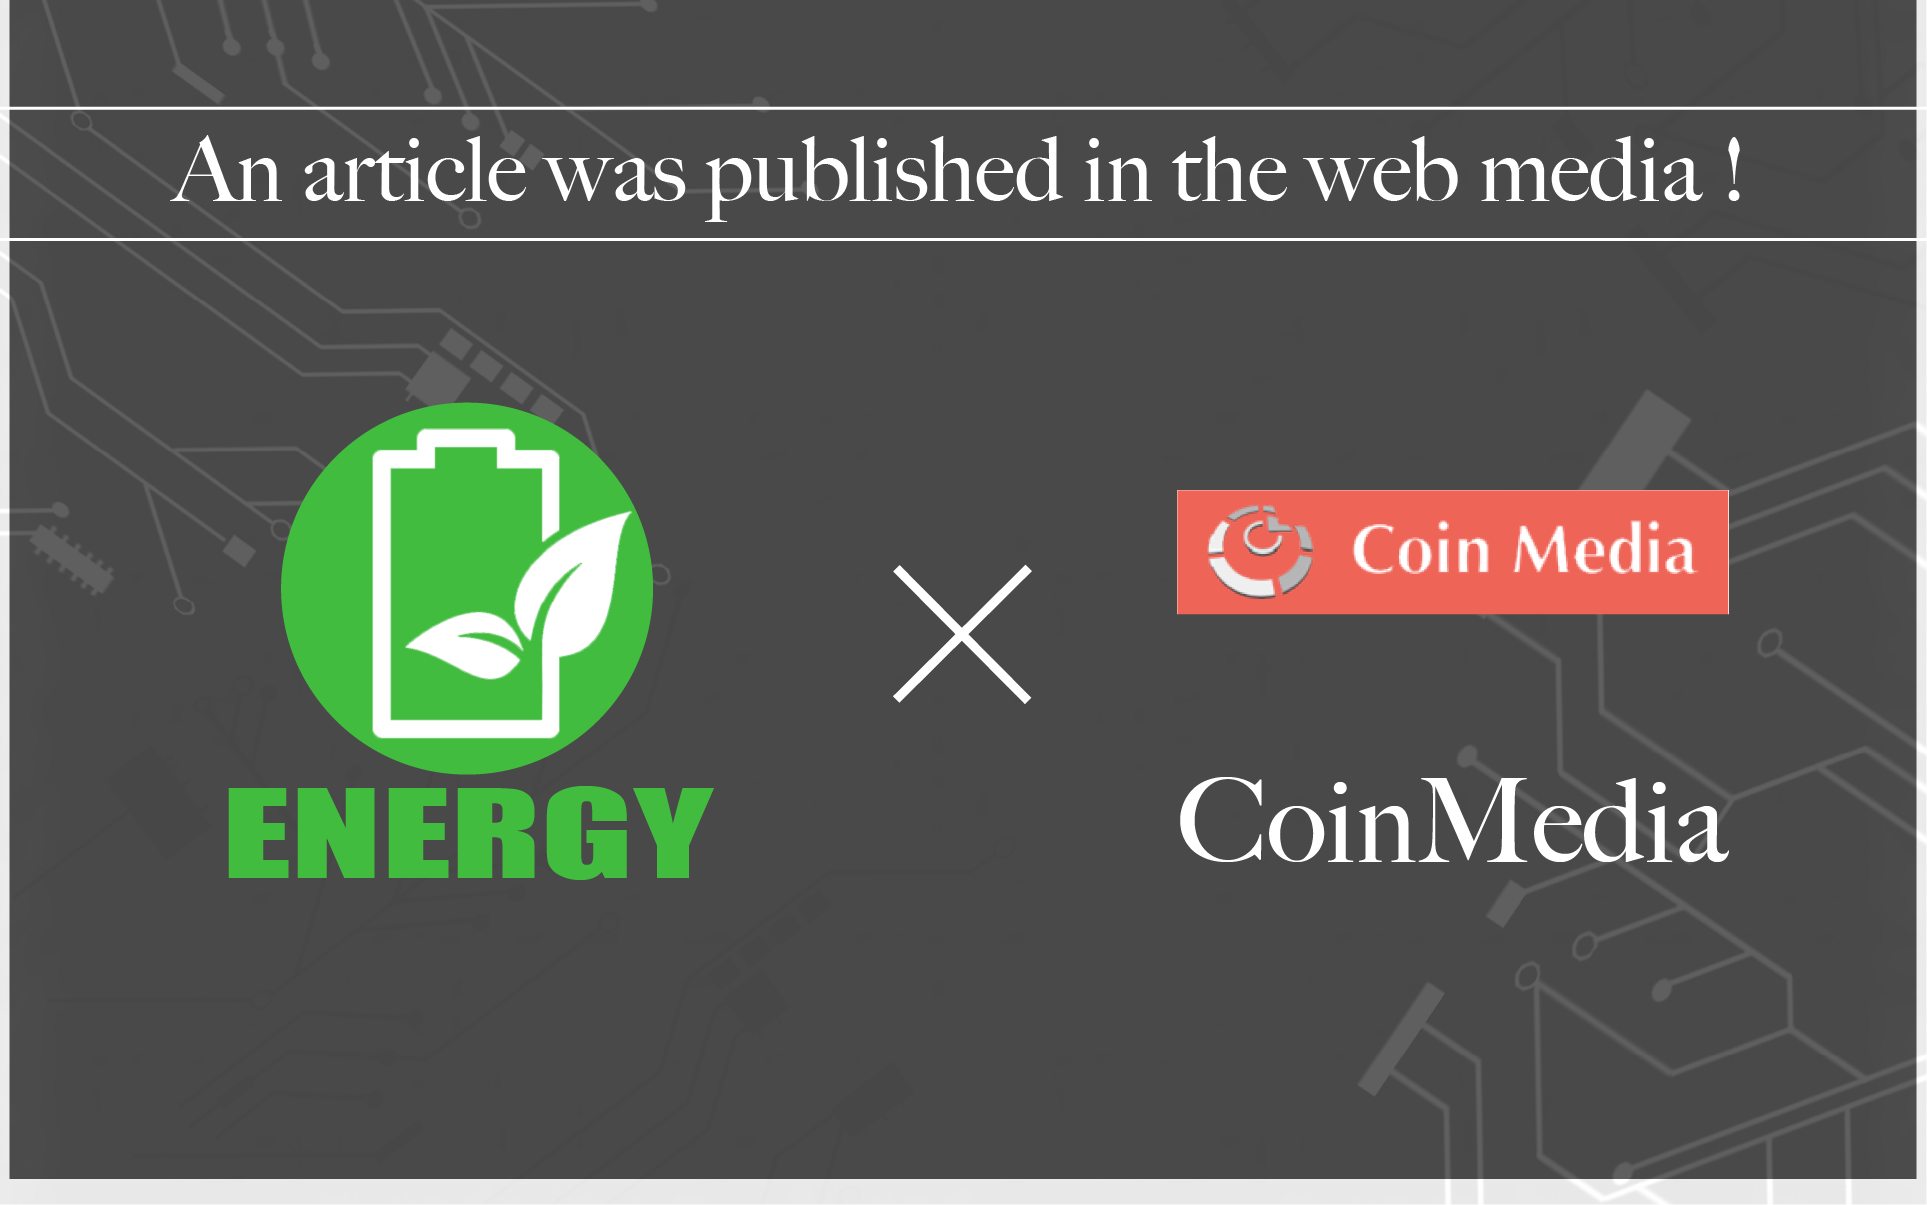 Published in the CoinMedia